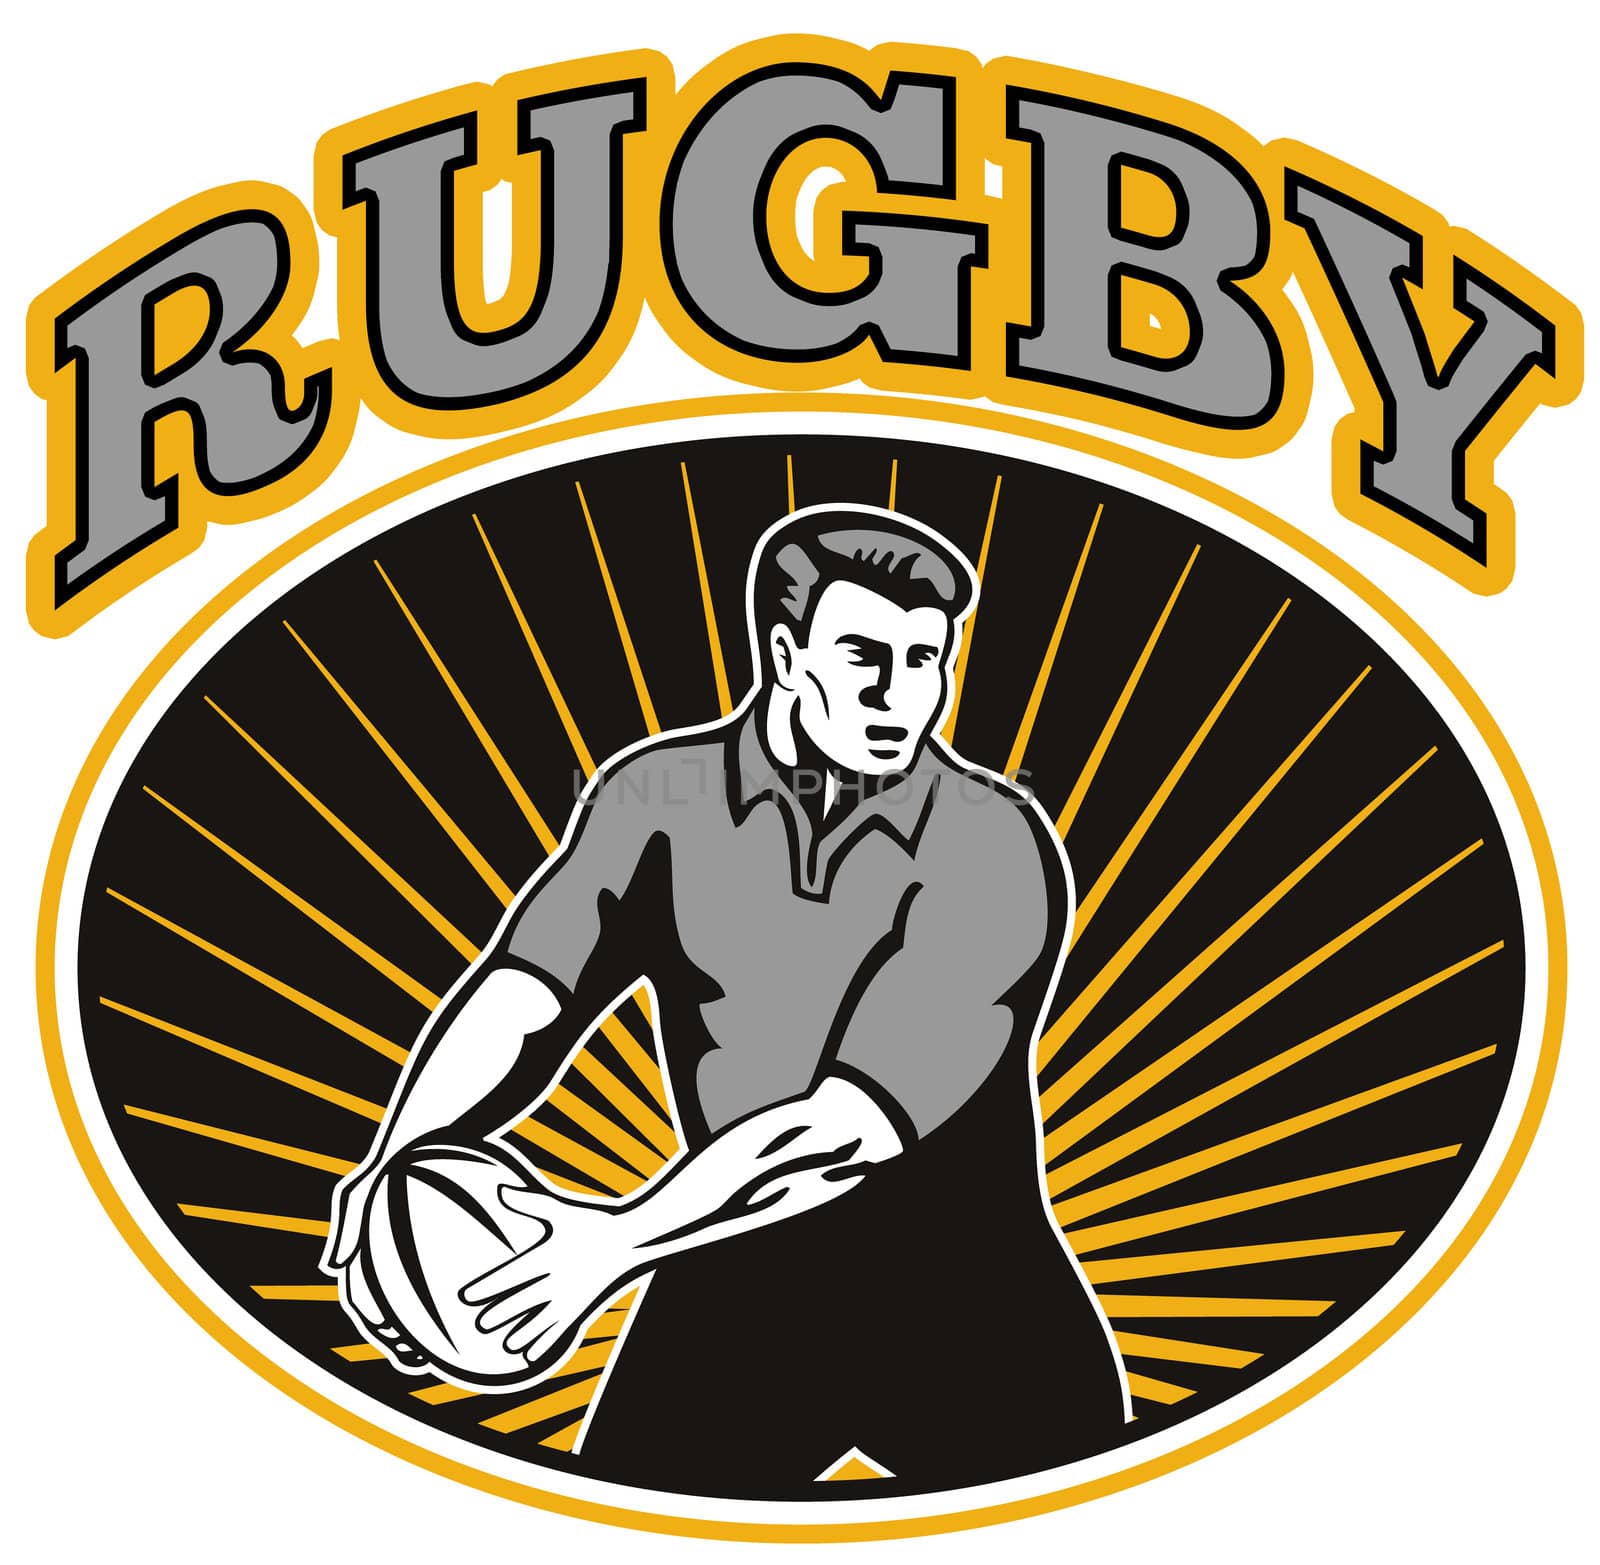 retro style illustration of a rugby player passing ball viewed from front with ball in background and words "rugby"